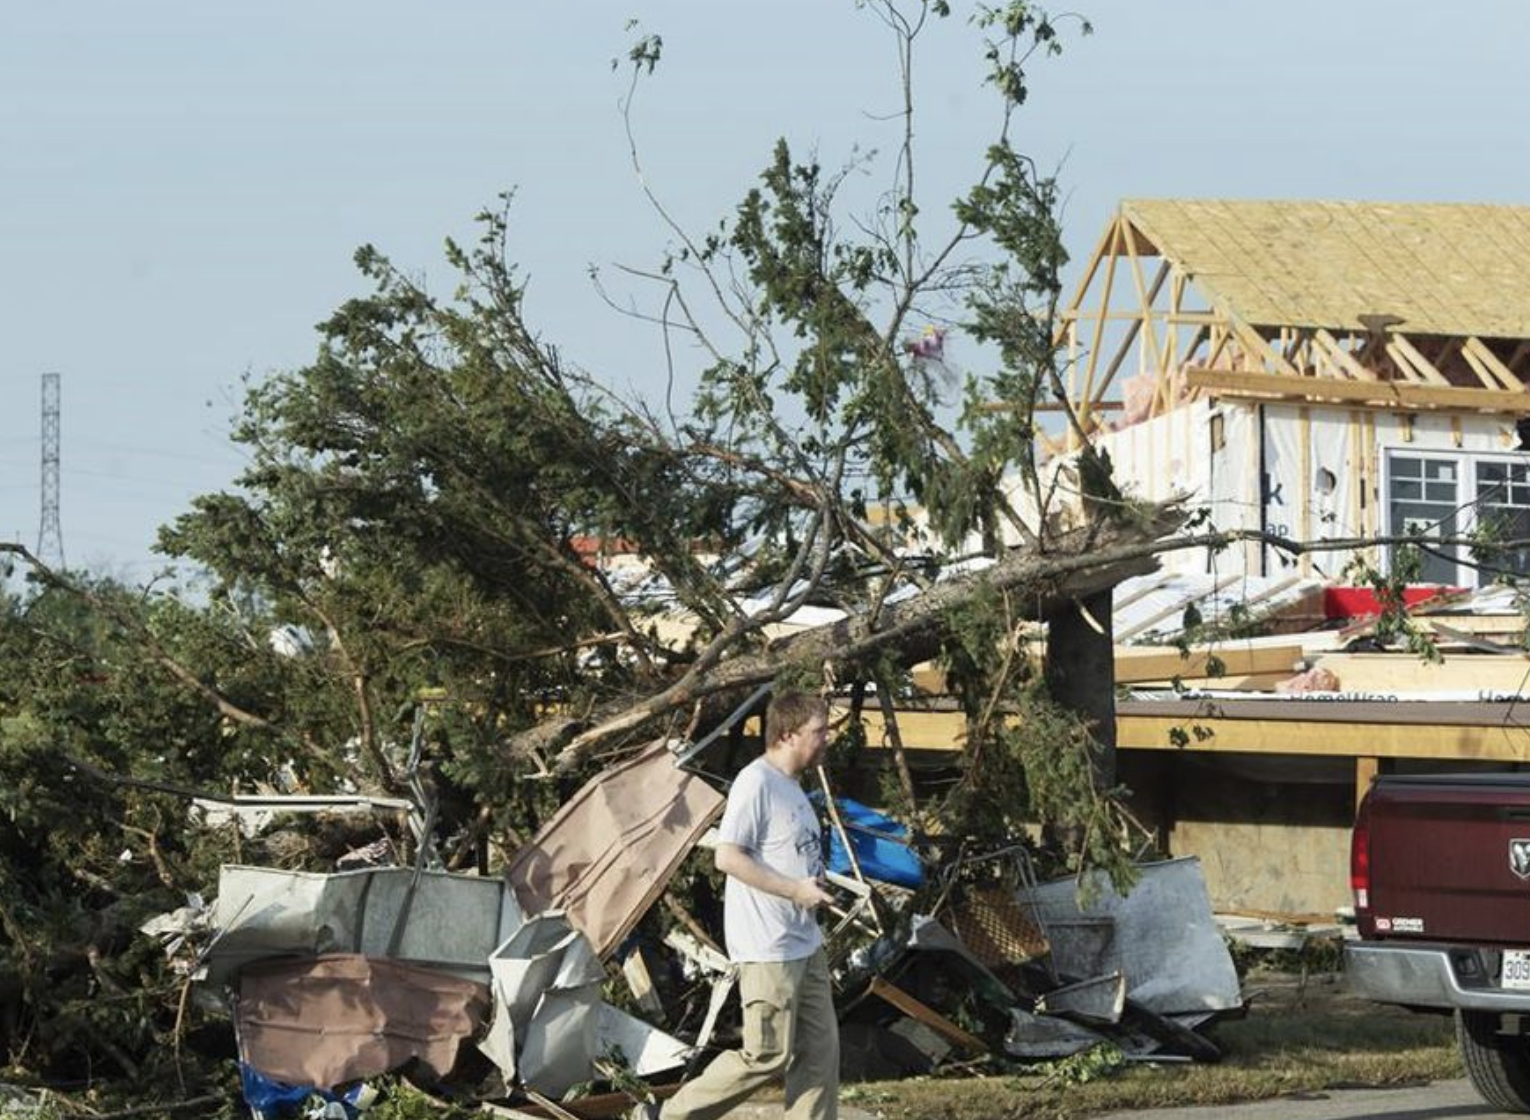 Cleanup of trees, debris underway after deadly Quebec tornado that ‘came too fast’